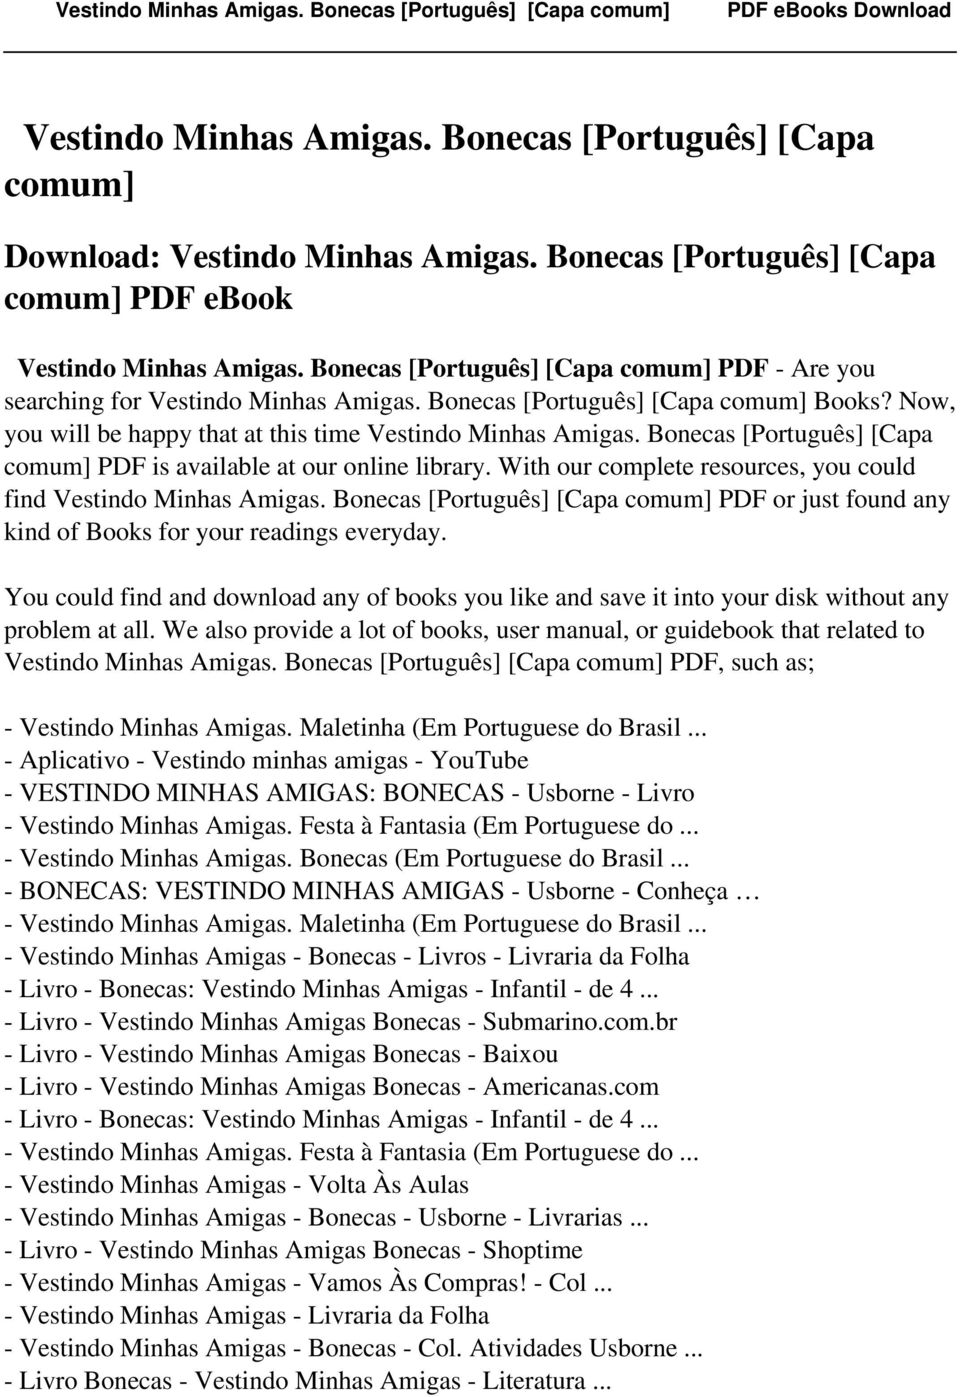 Bonecas [Português] [Capa comum] PDF is available at our online library. With our complete resources, you could find Vestindo Minhas Amigas.